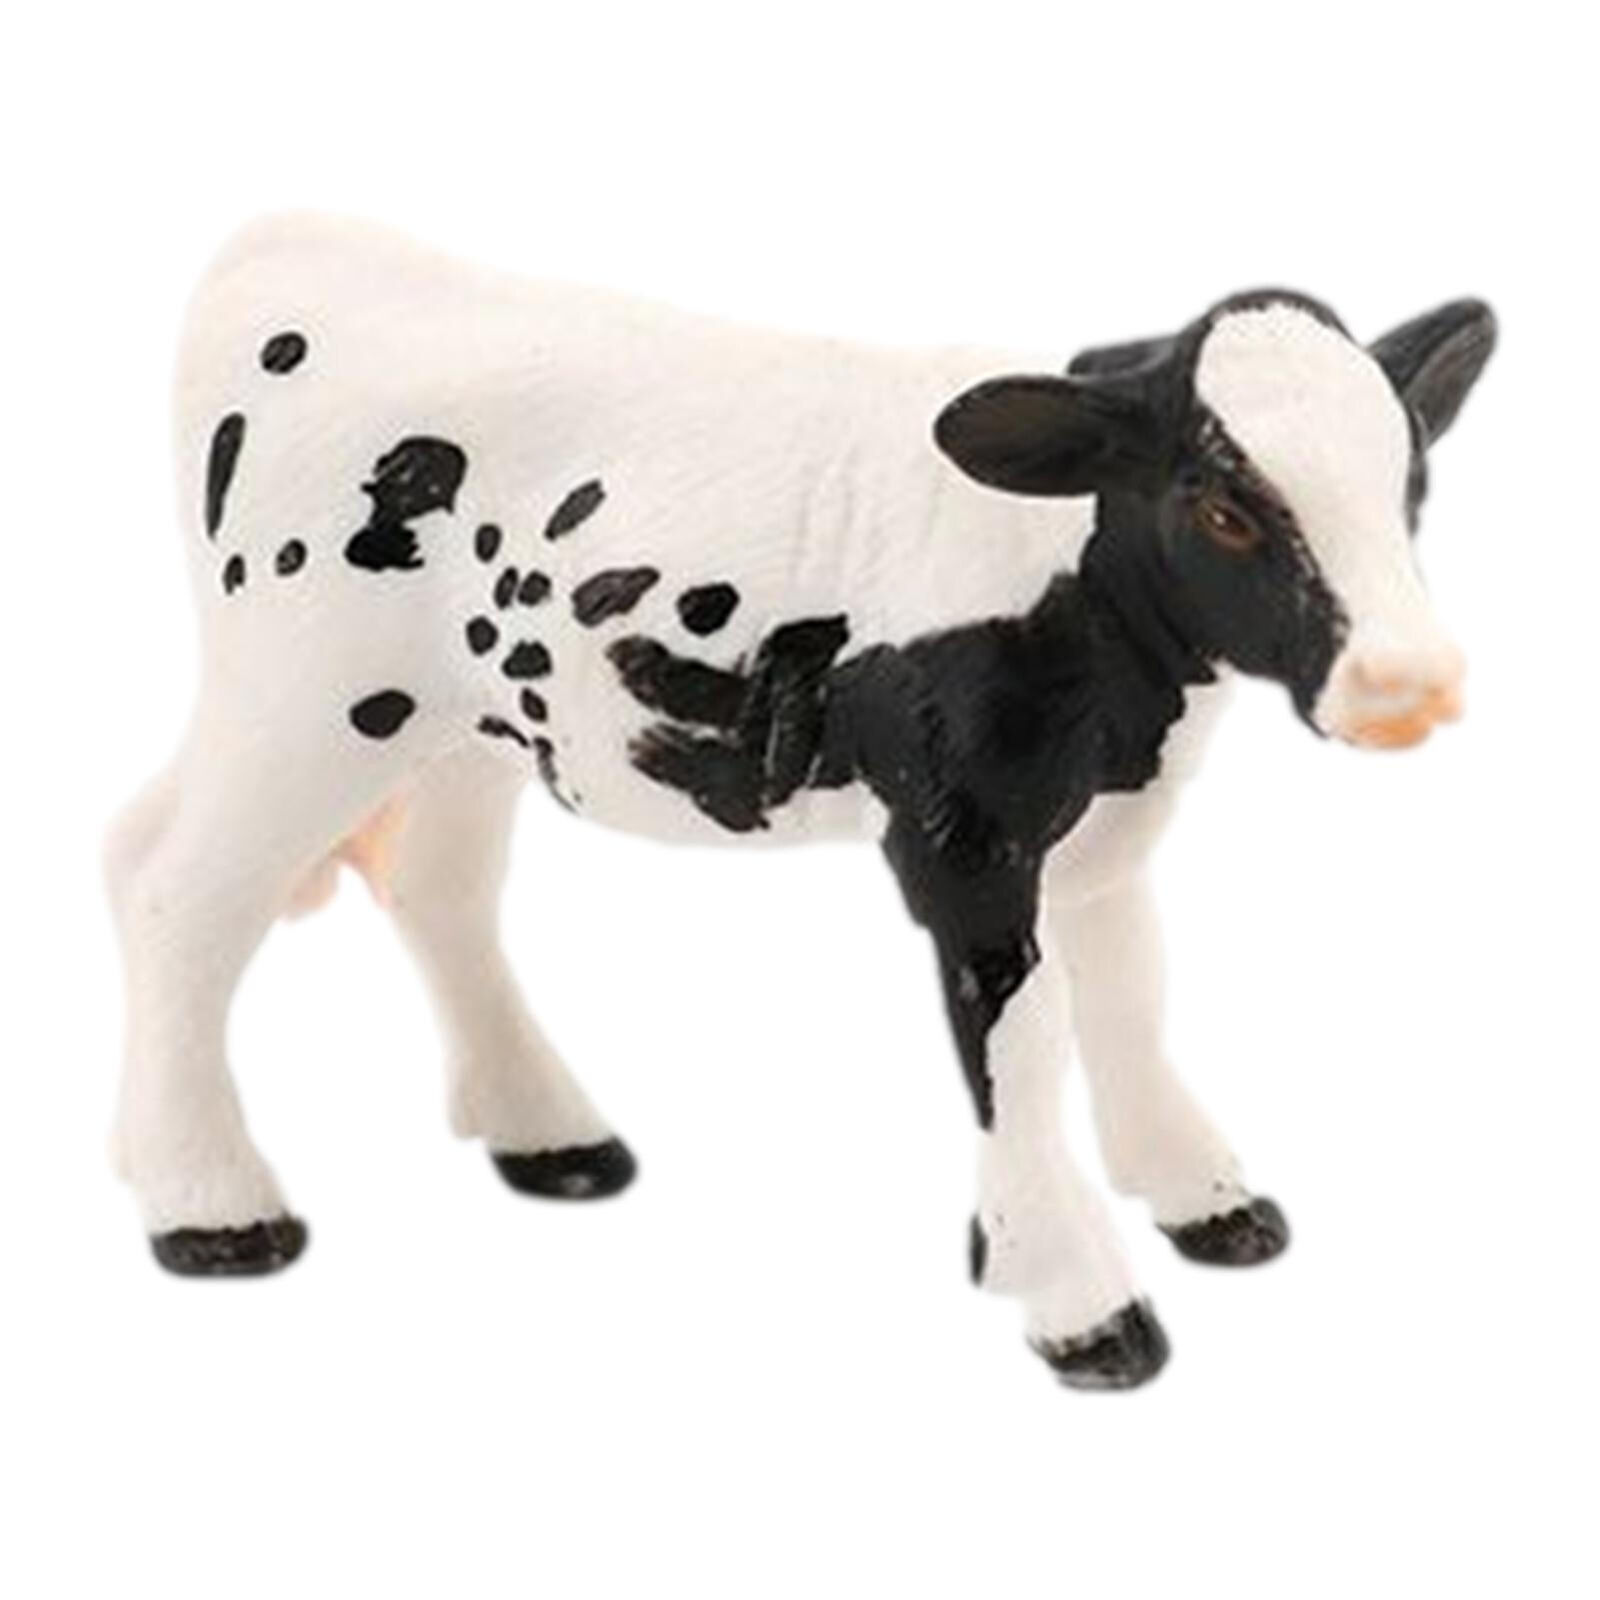 Calf Statue Realistic Holstein Cow Toys Farm Animals Educational Learning Toy